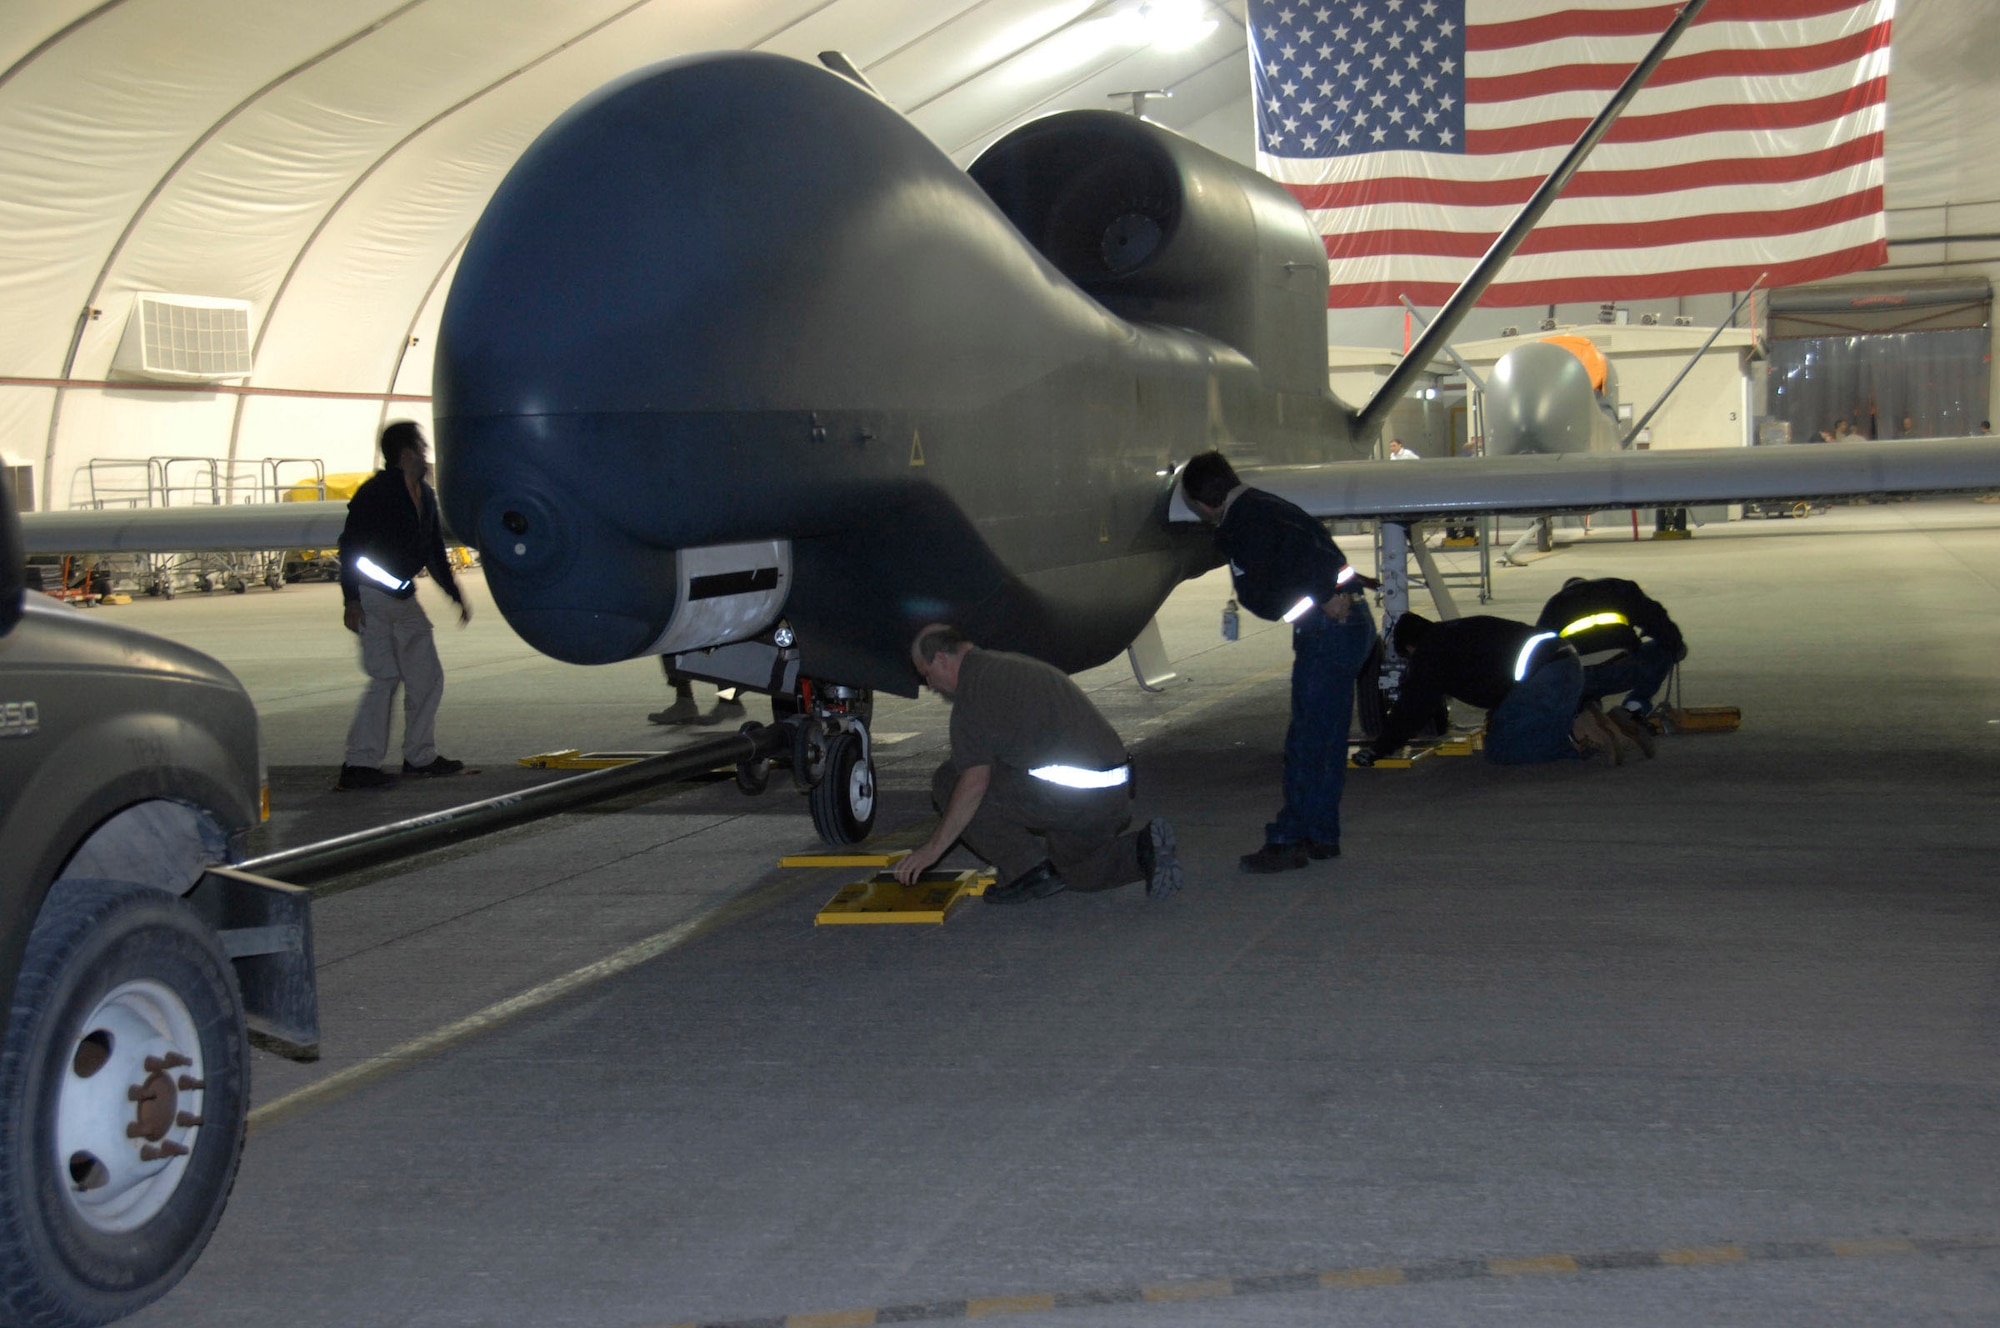 SOUTHWEST ASIA -- Personnel from the Broad Area Maritime Surveillance maintenance detachment here prepare to weigh the Navy Global Hawk to determine how much fuel it consumed on its flight from Naval Air Station Patuxent River, Md. This is the first operational deployment for the BAMS program after its test and development phase. (U.S. Air Force photo by Staff Sgt. Mike Andriacco) (released)